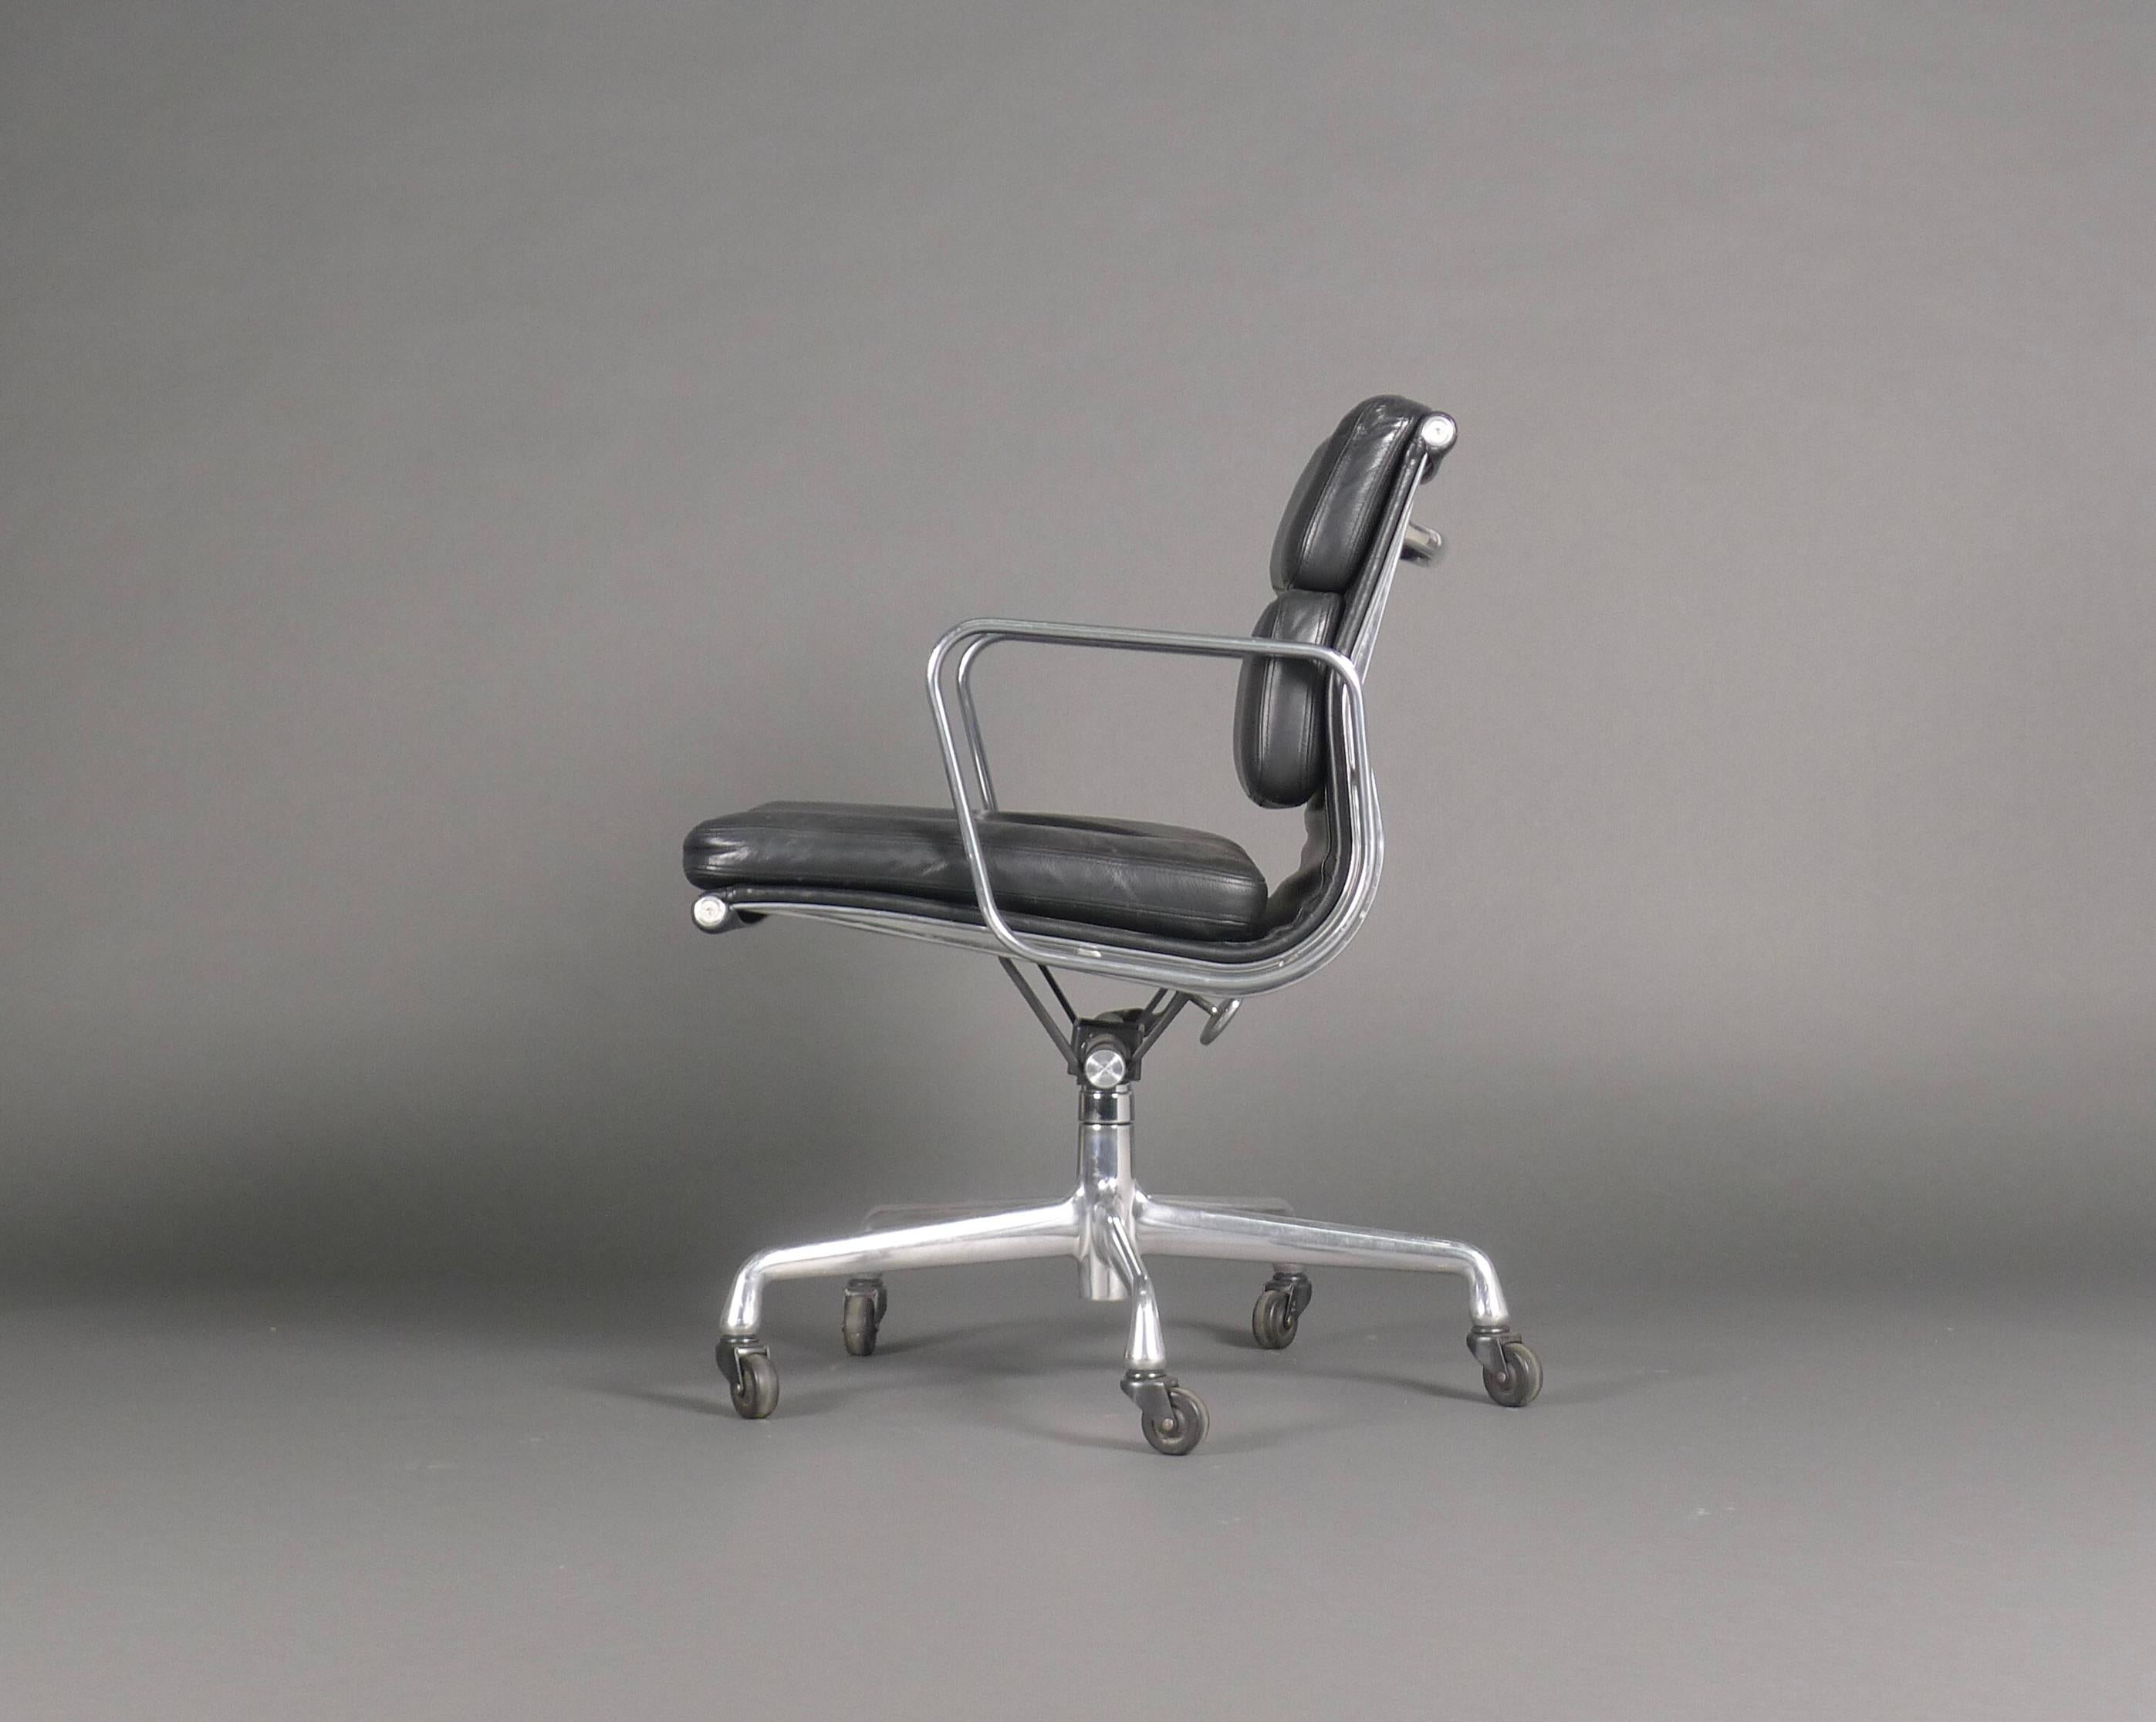 Herman Miller low back soft pad desk/office chair from the Eames Aluminium Group series, model EA435.

Black leather padded back and seat on aluminium frame and 5-star universal base on castors.  Height adjustable and with tilt and swivel